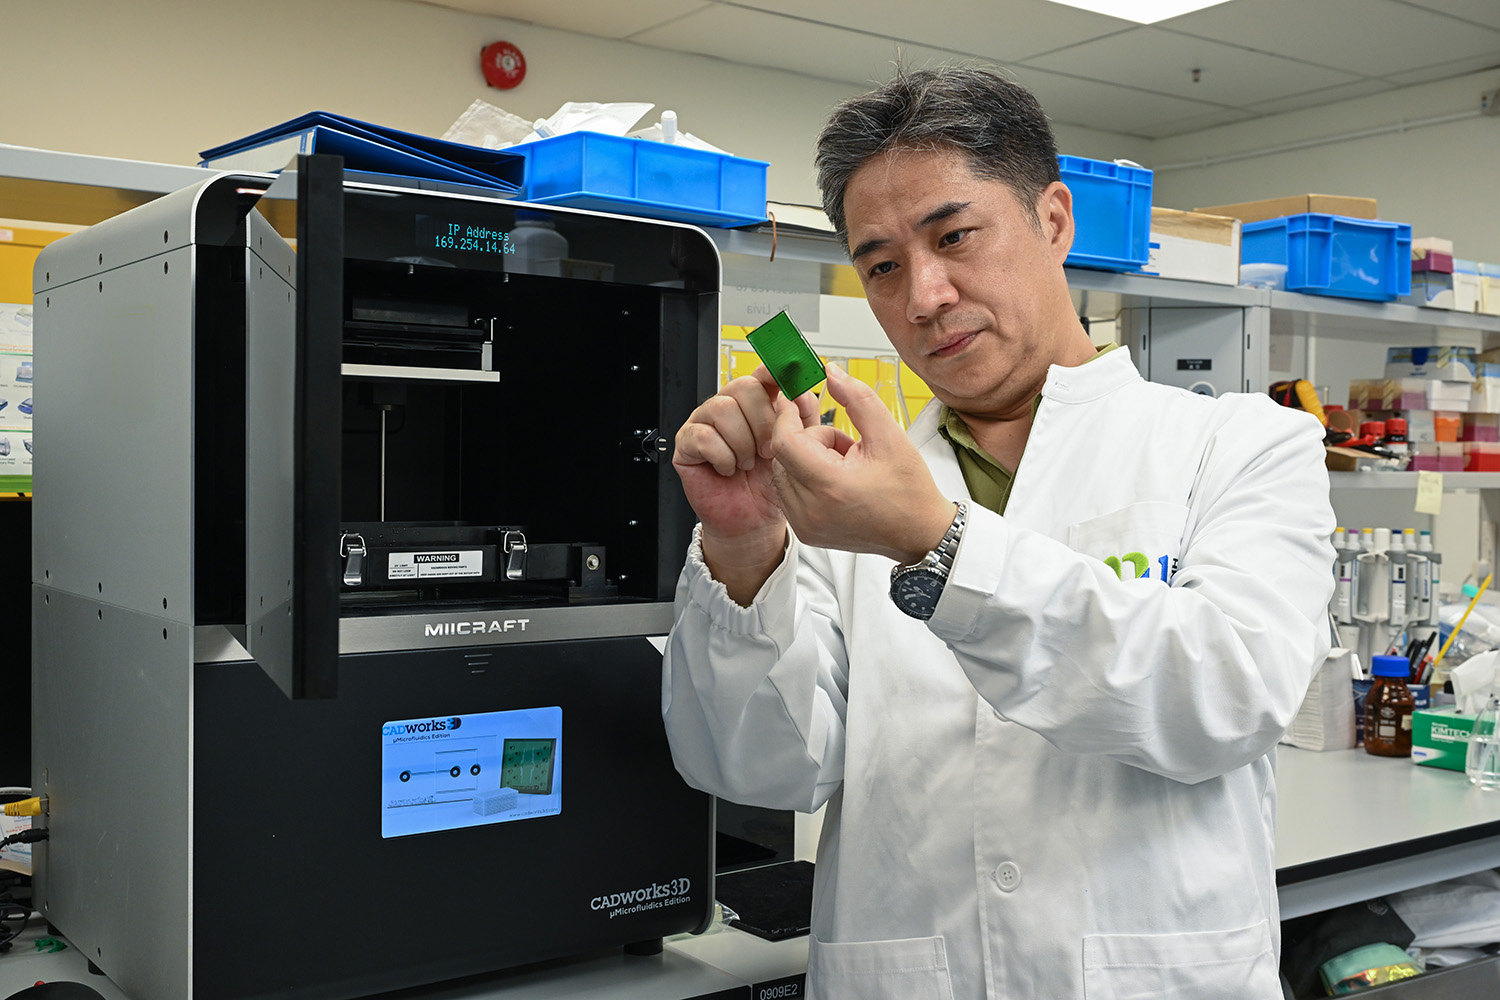 Dr Chen Jianlin, Assistant Professor of the School of Science and Technology, and his team invent the “microfluidics analytical device” to monitor the bioactivity of “anaerobic digestion” in real time and learn about the impact of food waste on the “anaerobic digestion” of sewage sludge.